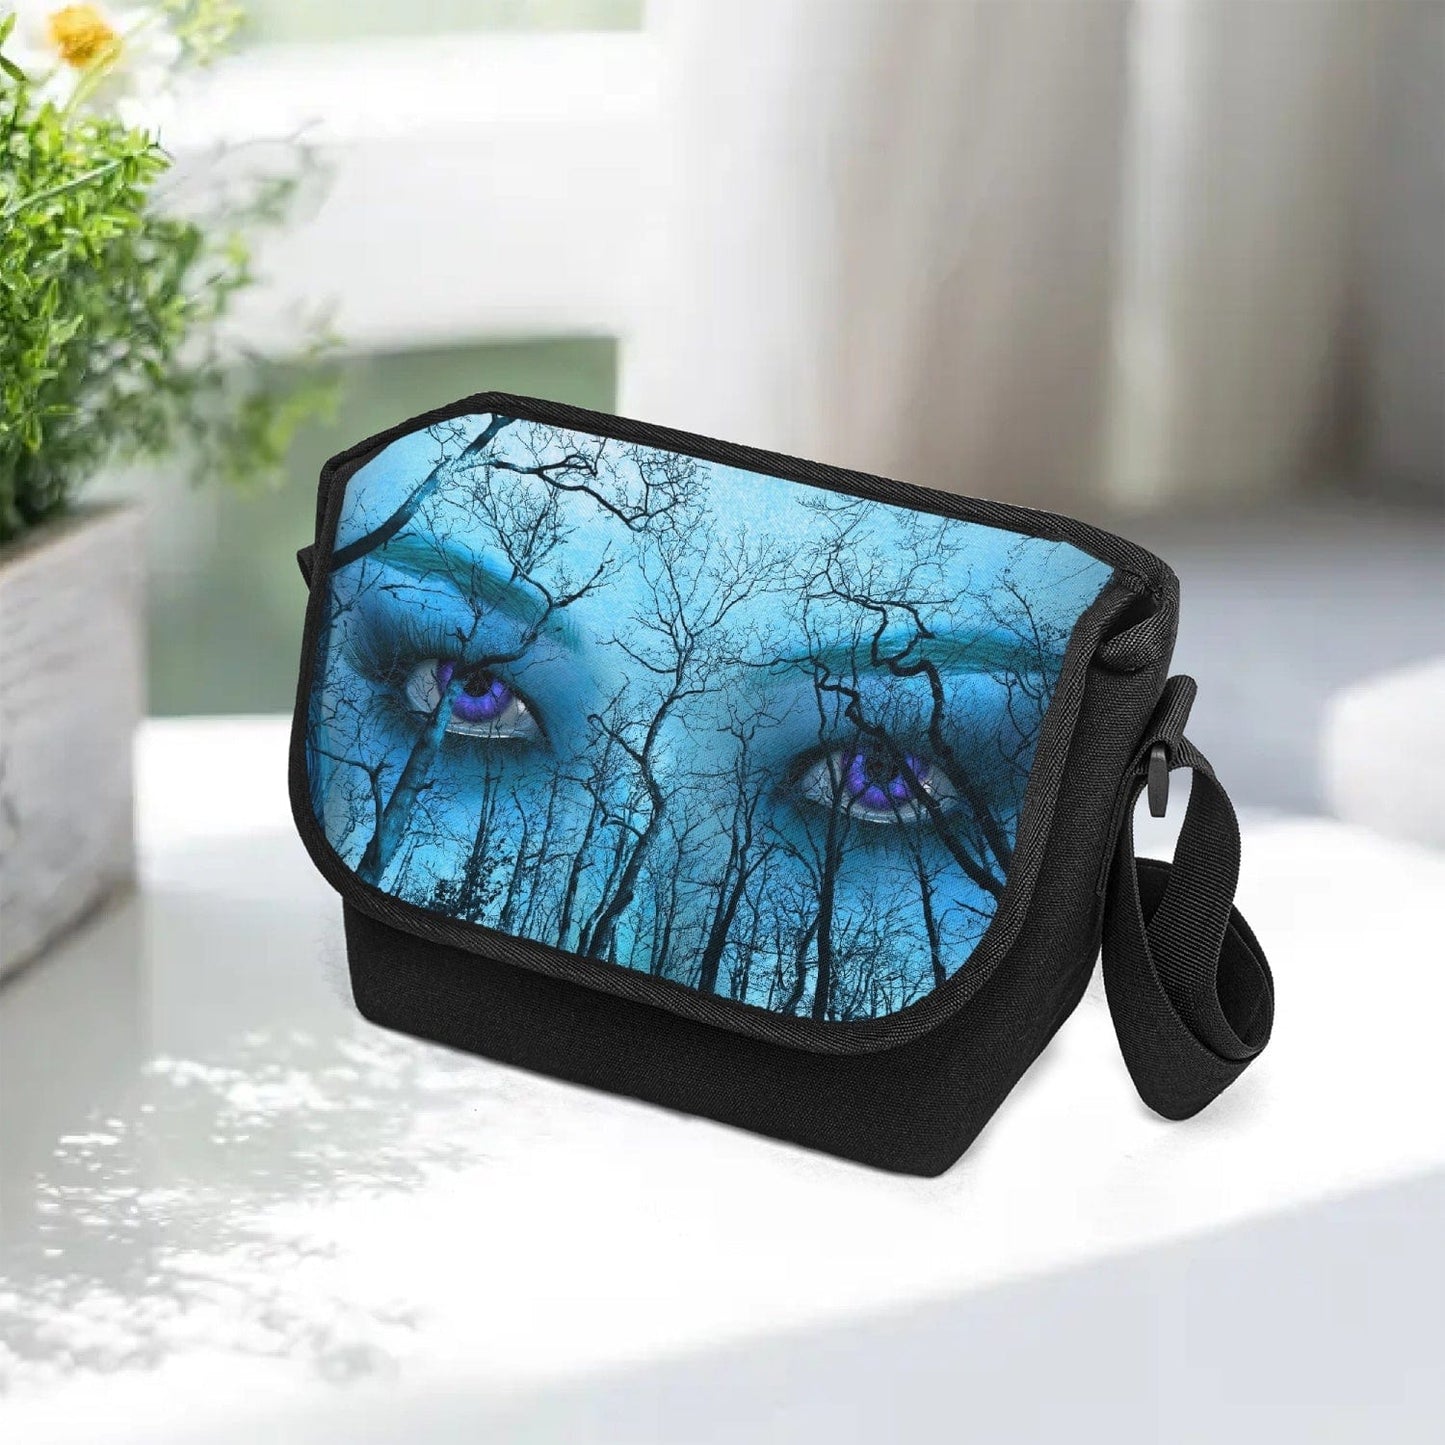 Piercing purple eyes feature on a forest themed print on this canvas messenger bag at Gallery Serpentine.  Blue and aqua tones give this a supernatural feel with a gothic naturecore theme 4